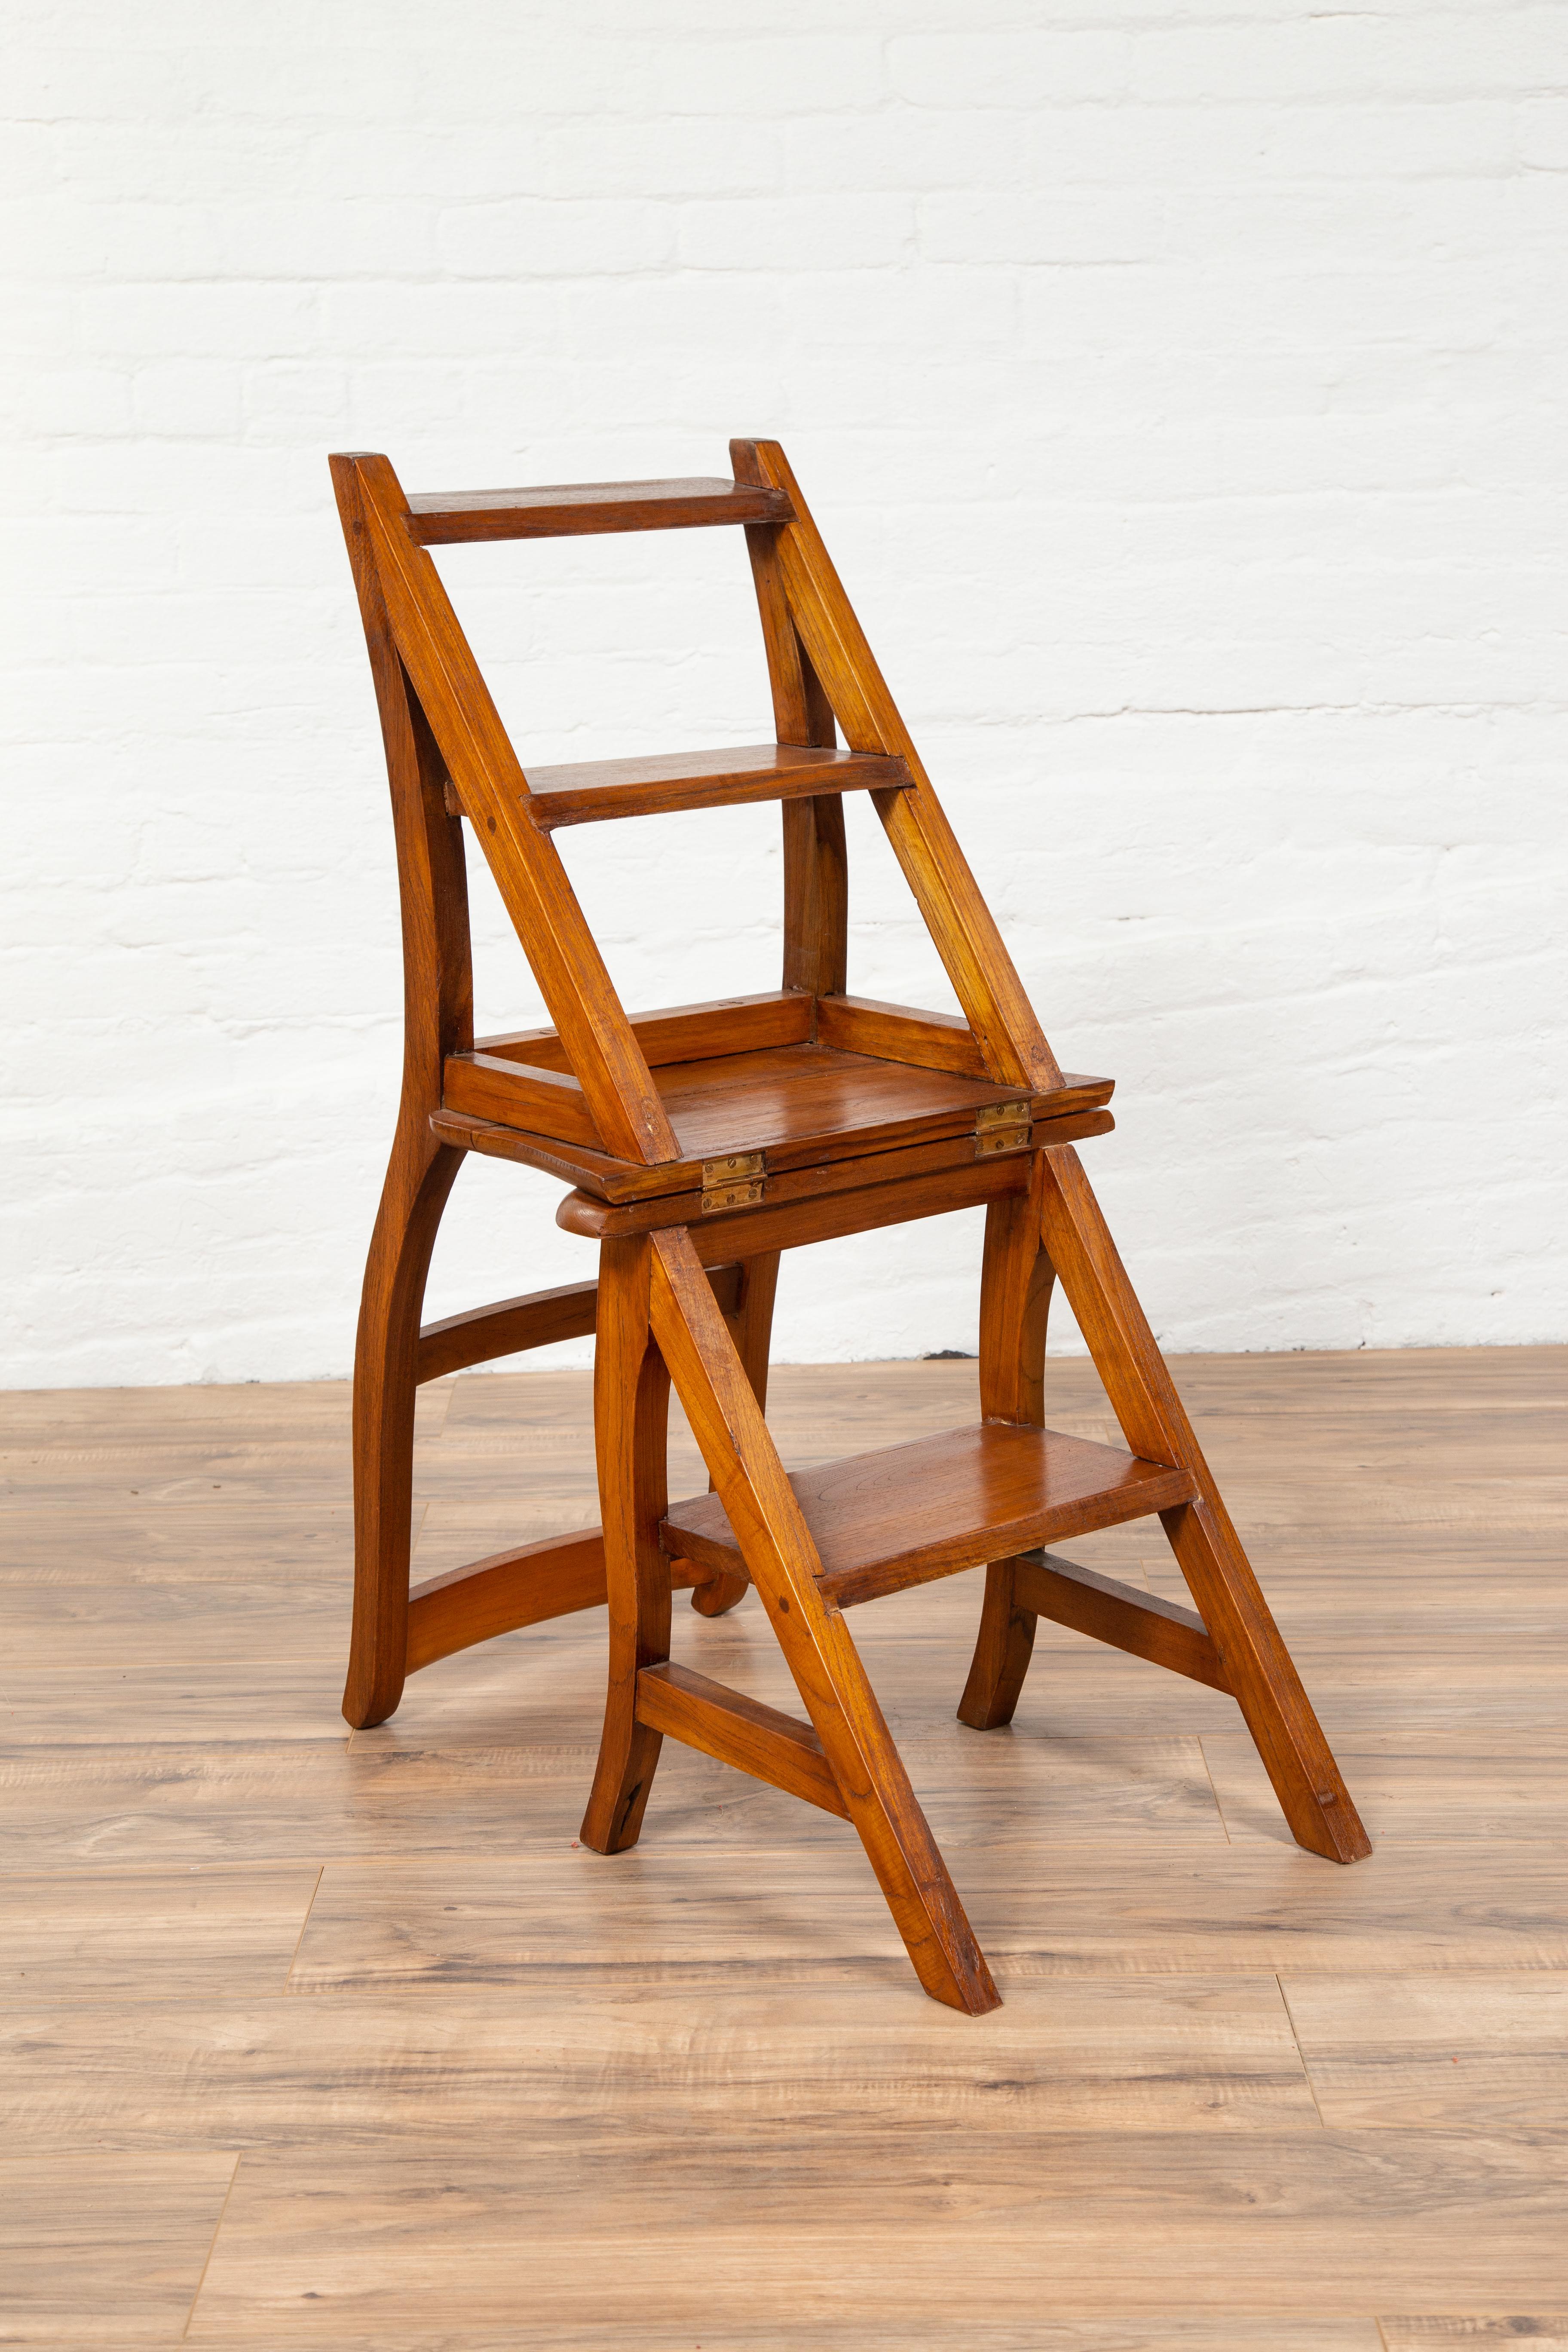 A vintage Indonesian teak wood Dutch Colonial metamorphic ladder chair from the midcentury period. This exquisite and convenient teak wood step ladder features a linear silhouette, accented by the delicate curvy presence of its rear legs. Unfolding